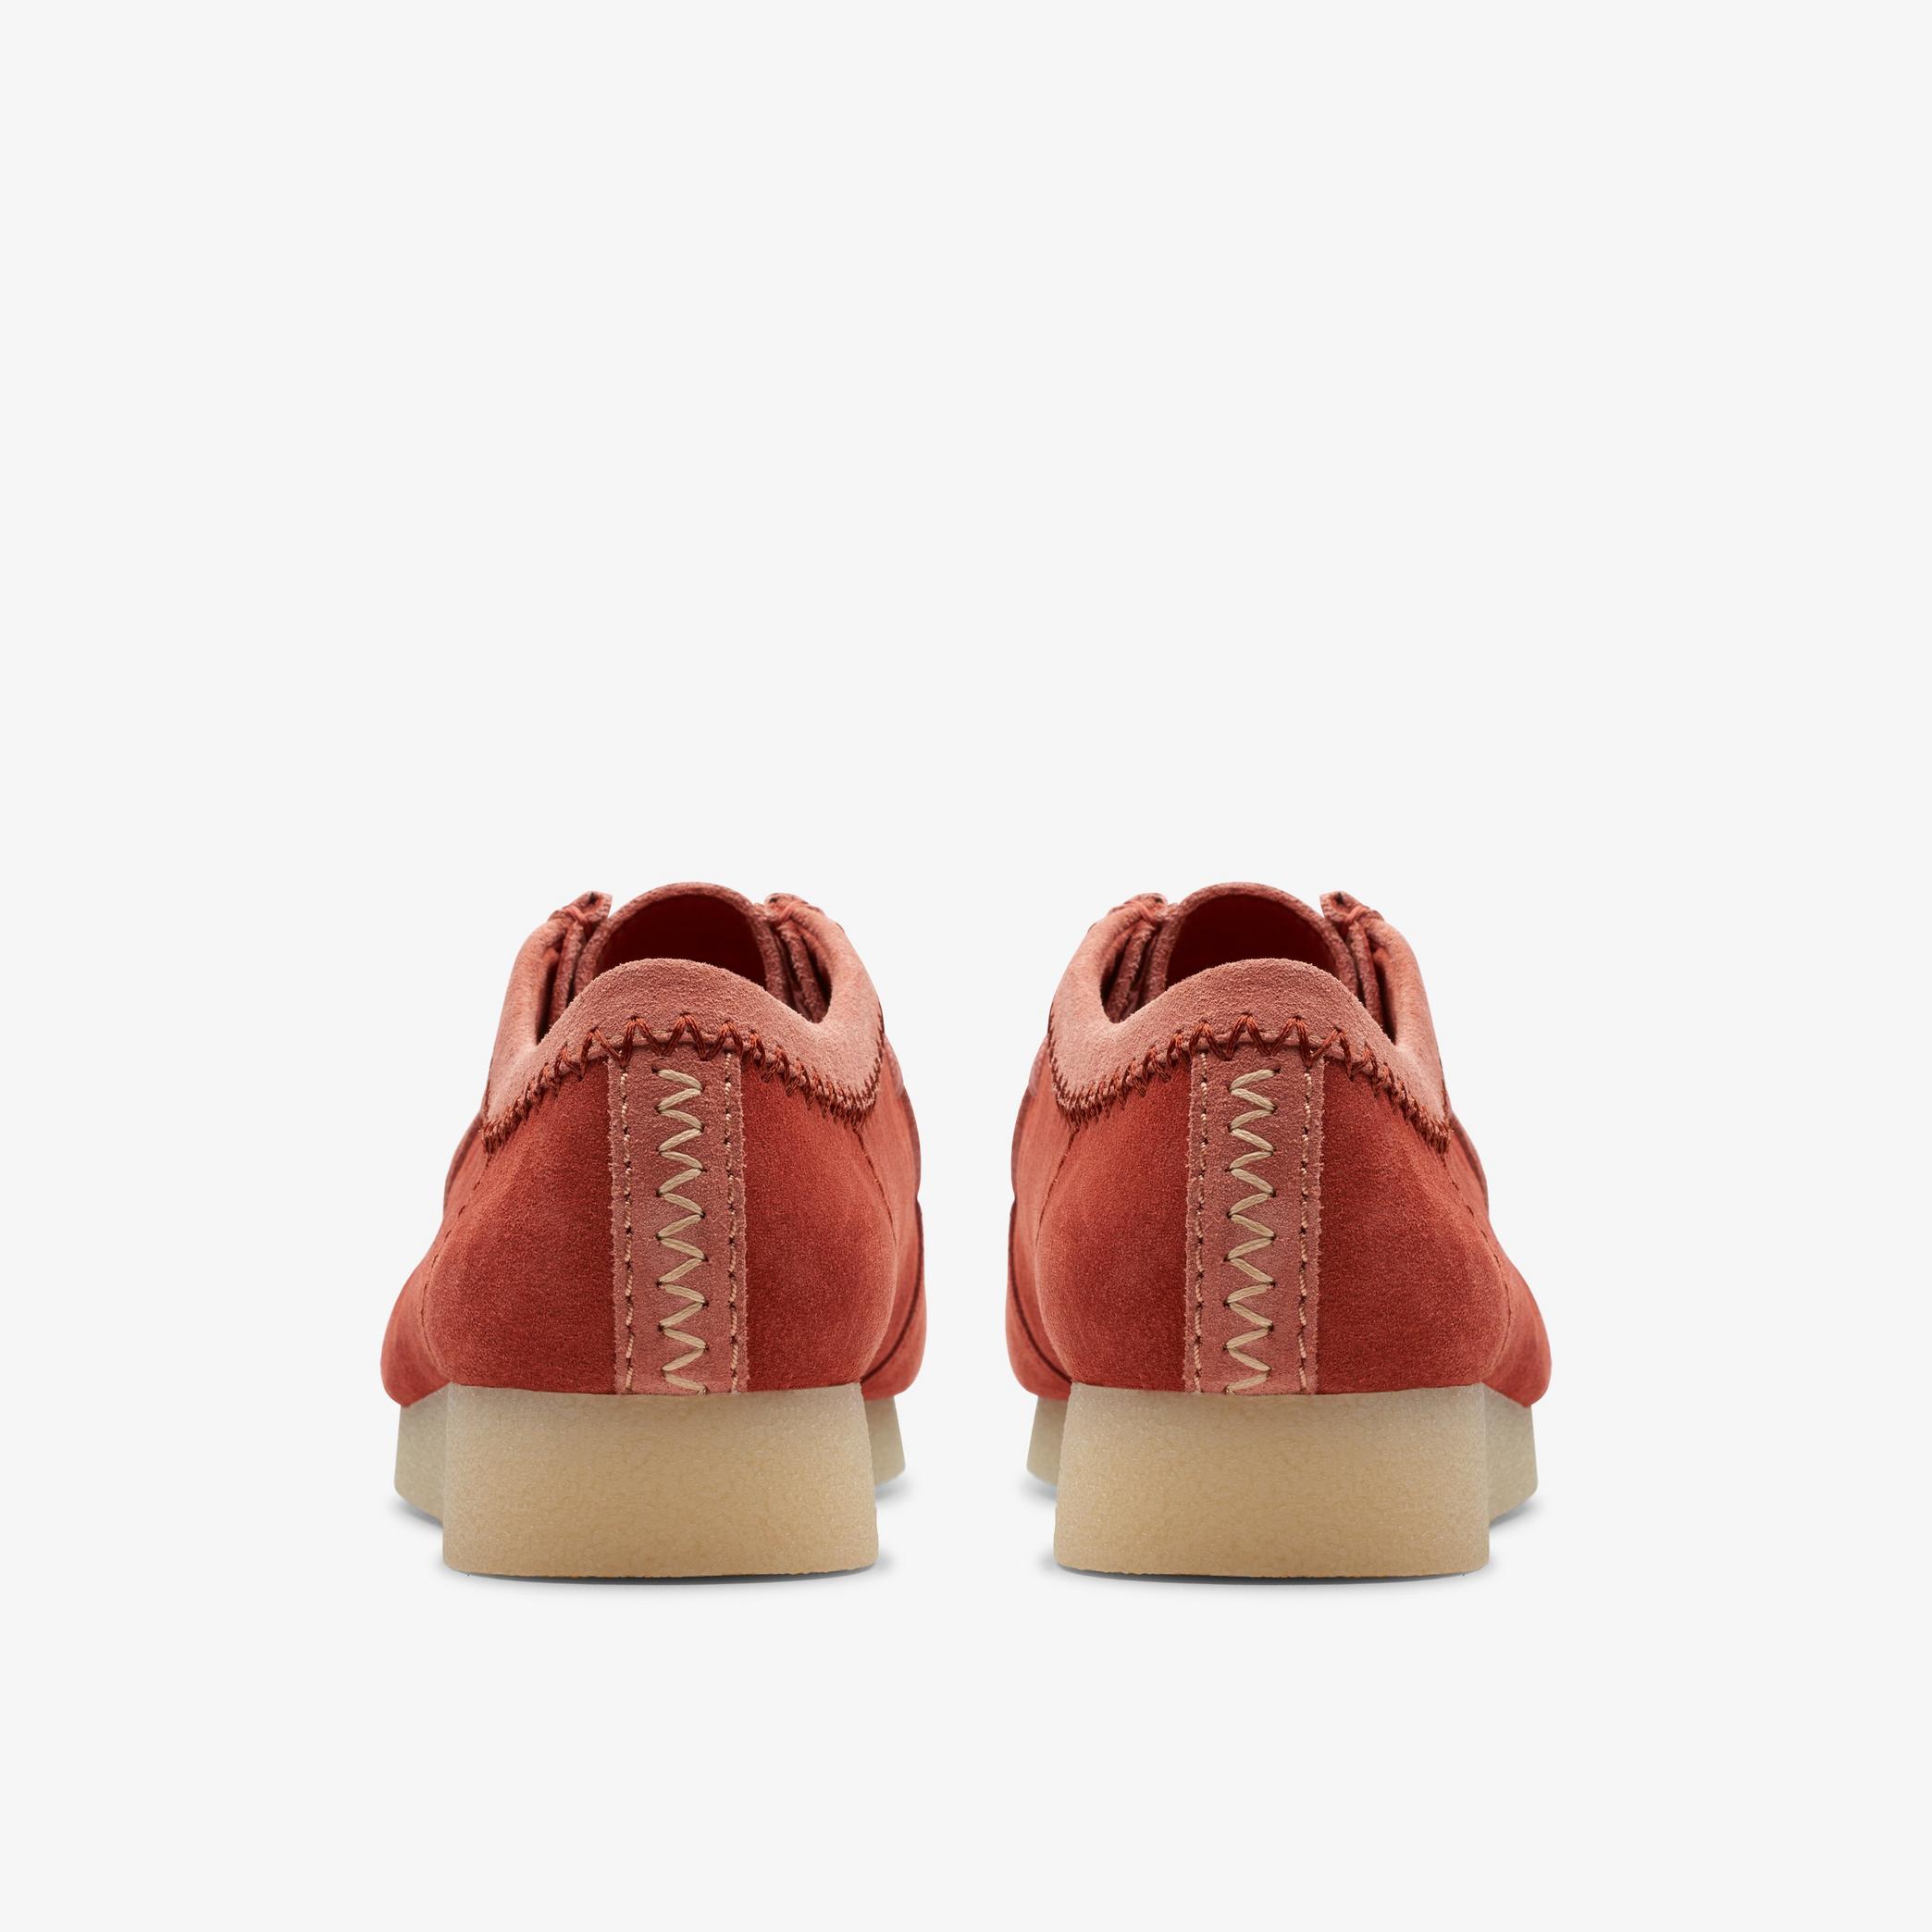 Wallabee EVO Terracotta Suede Moccasins, view 5 of 6